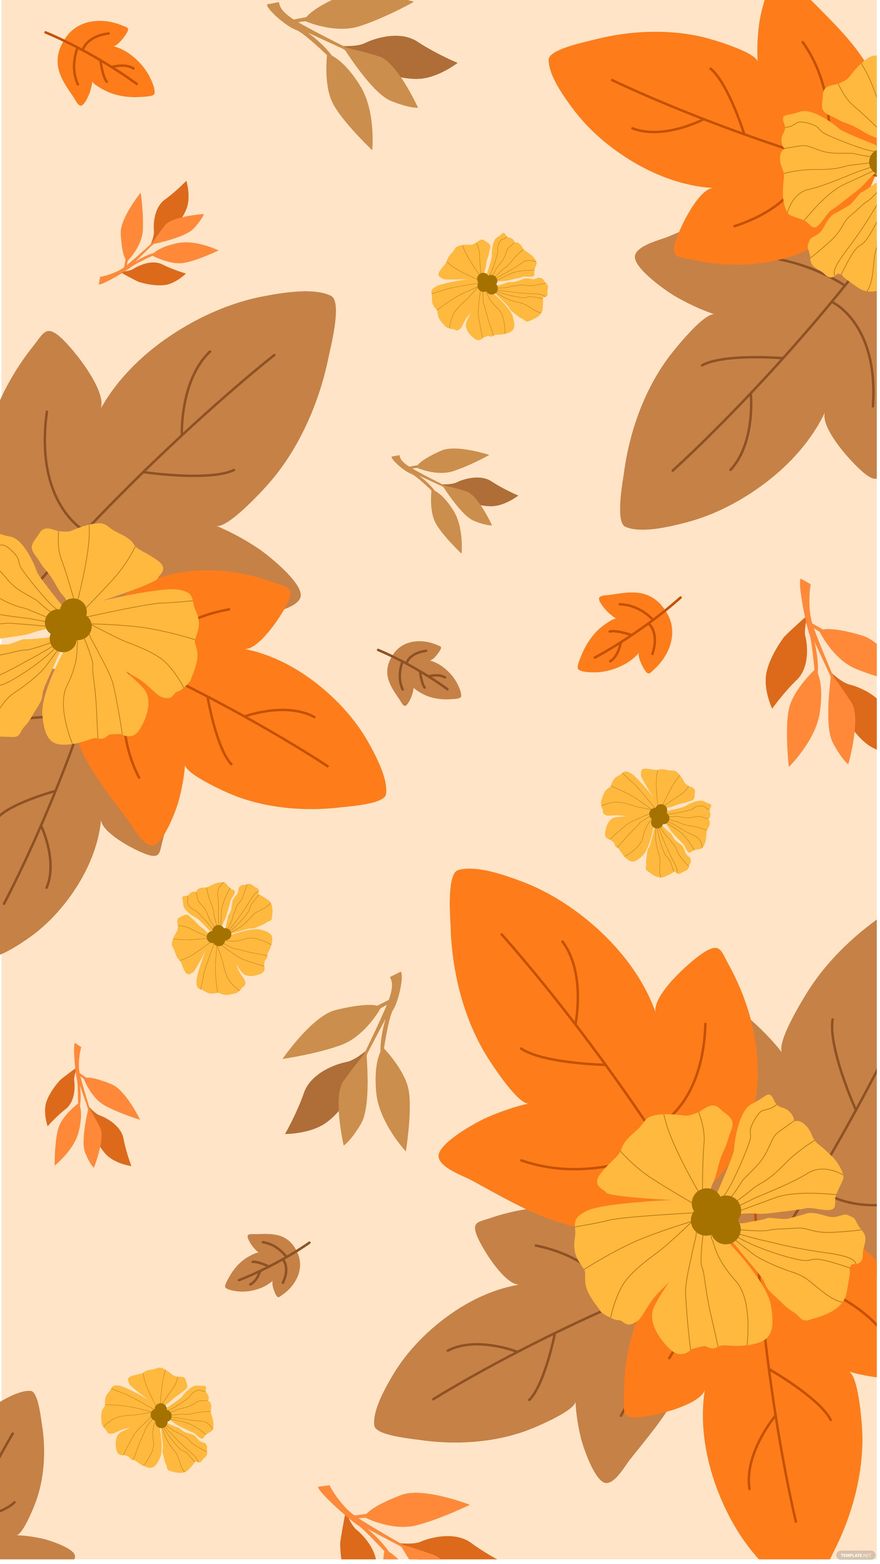 Free Fall Background iPhone in Illustrator, EPS, SVG, JPG